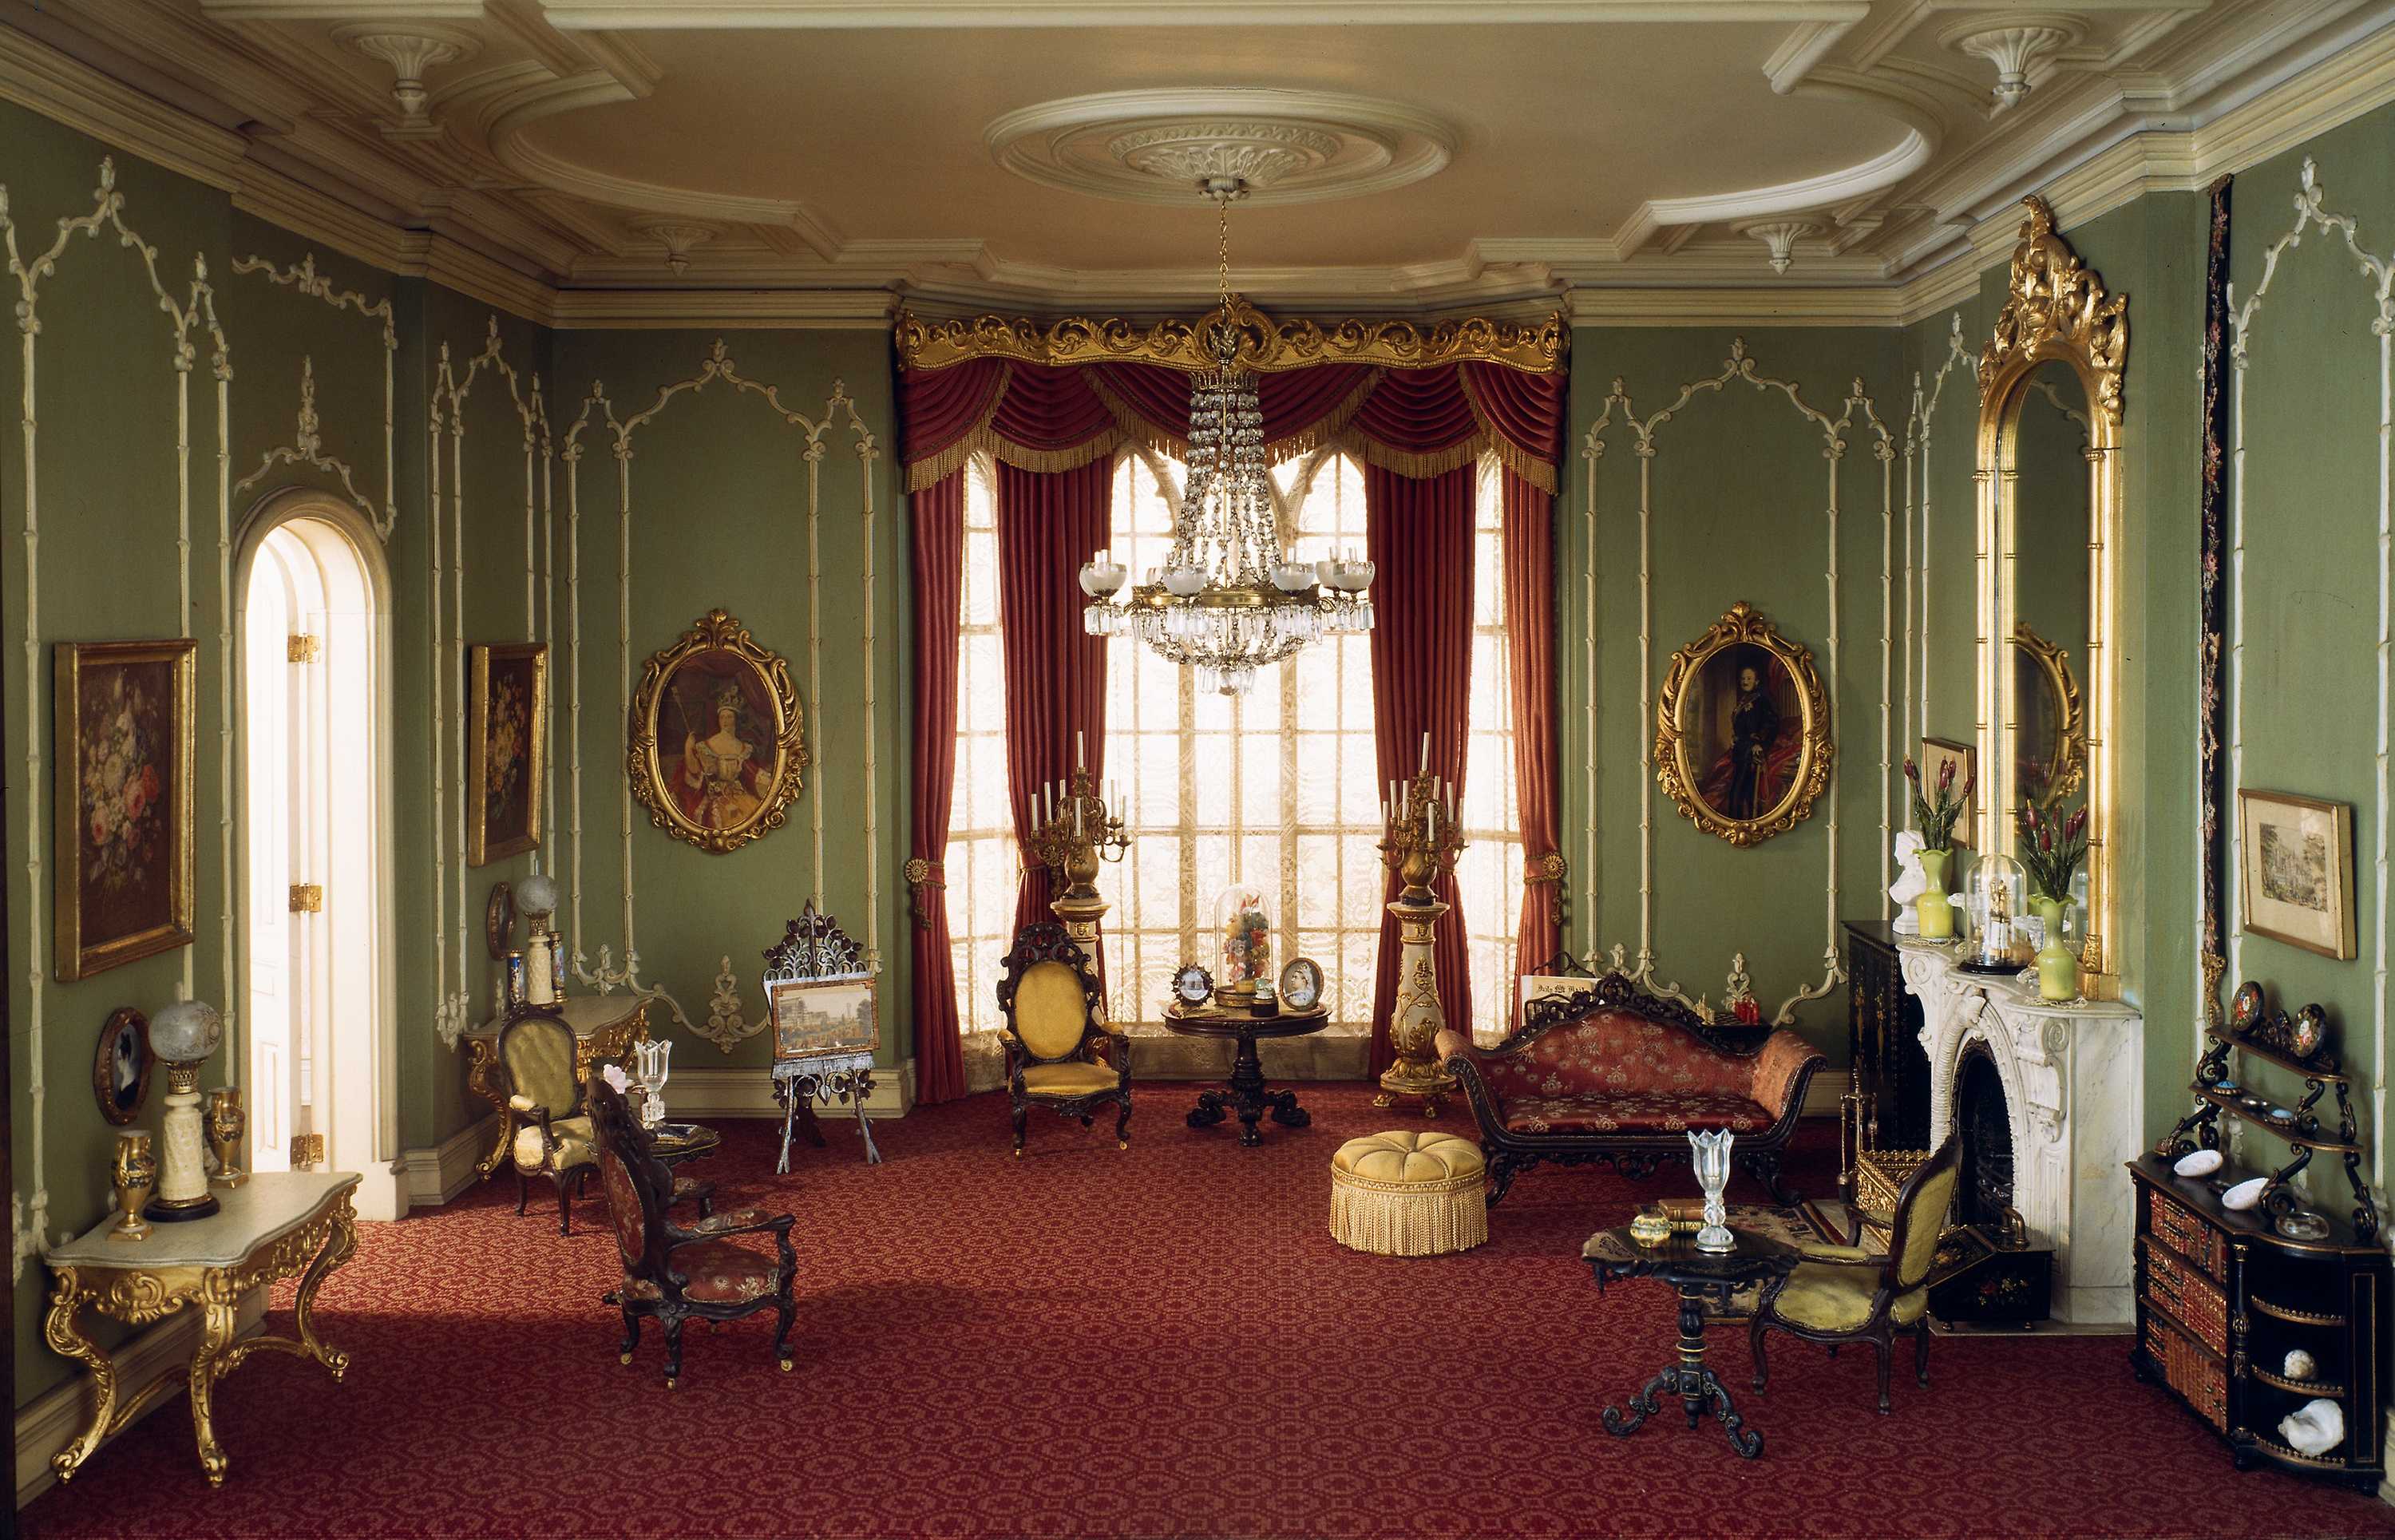 Room of the Victorian Period